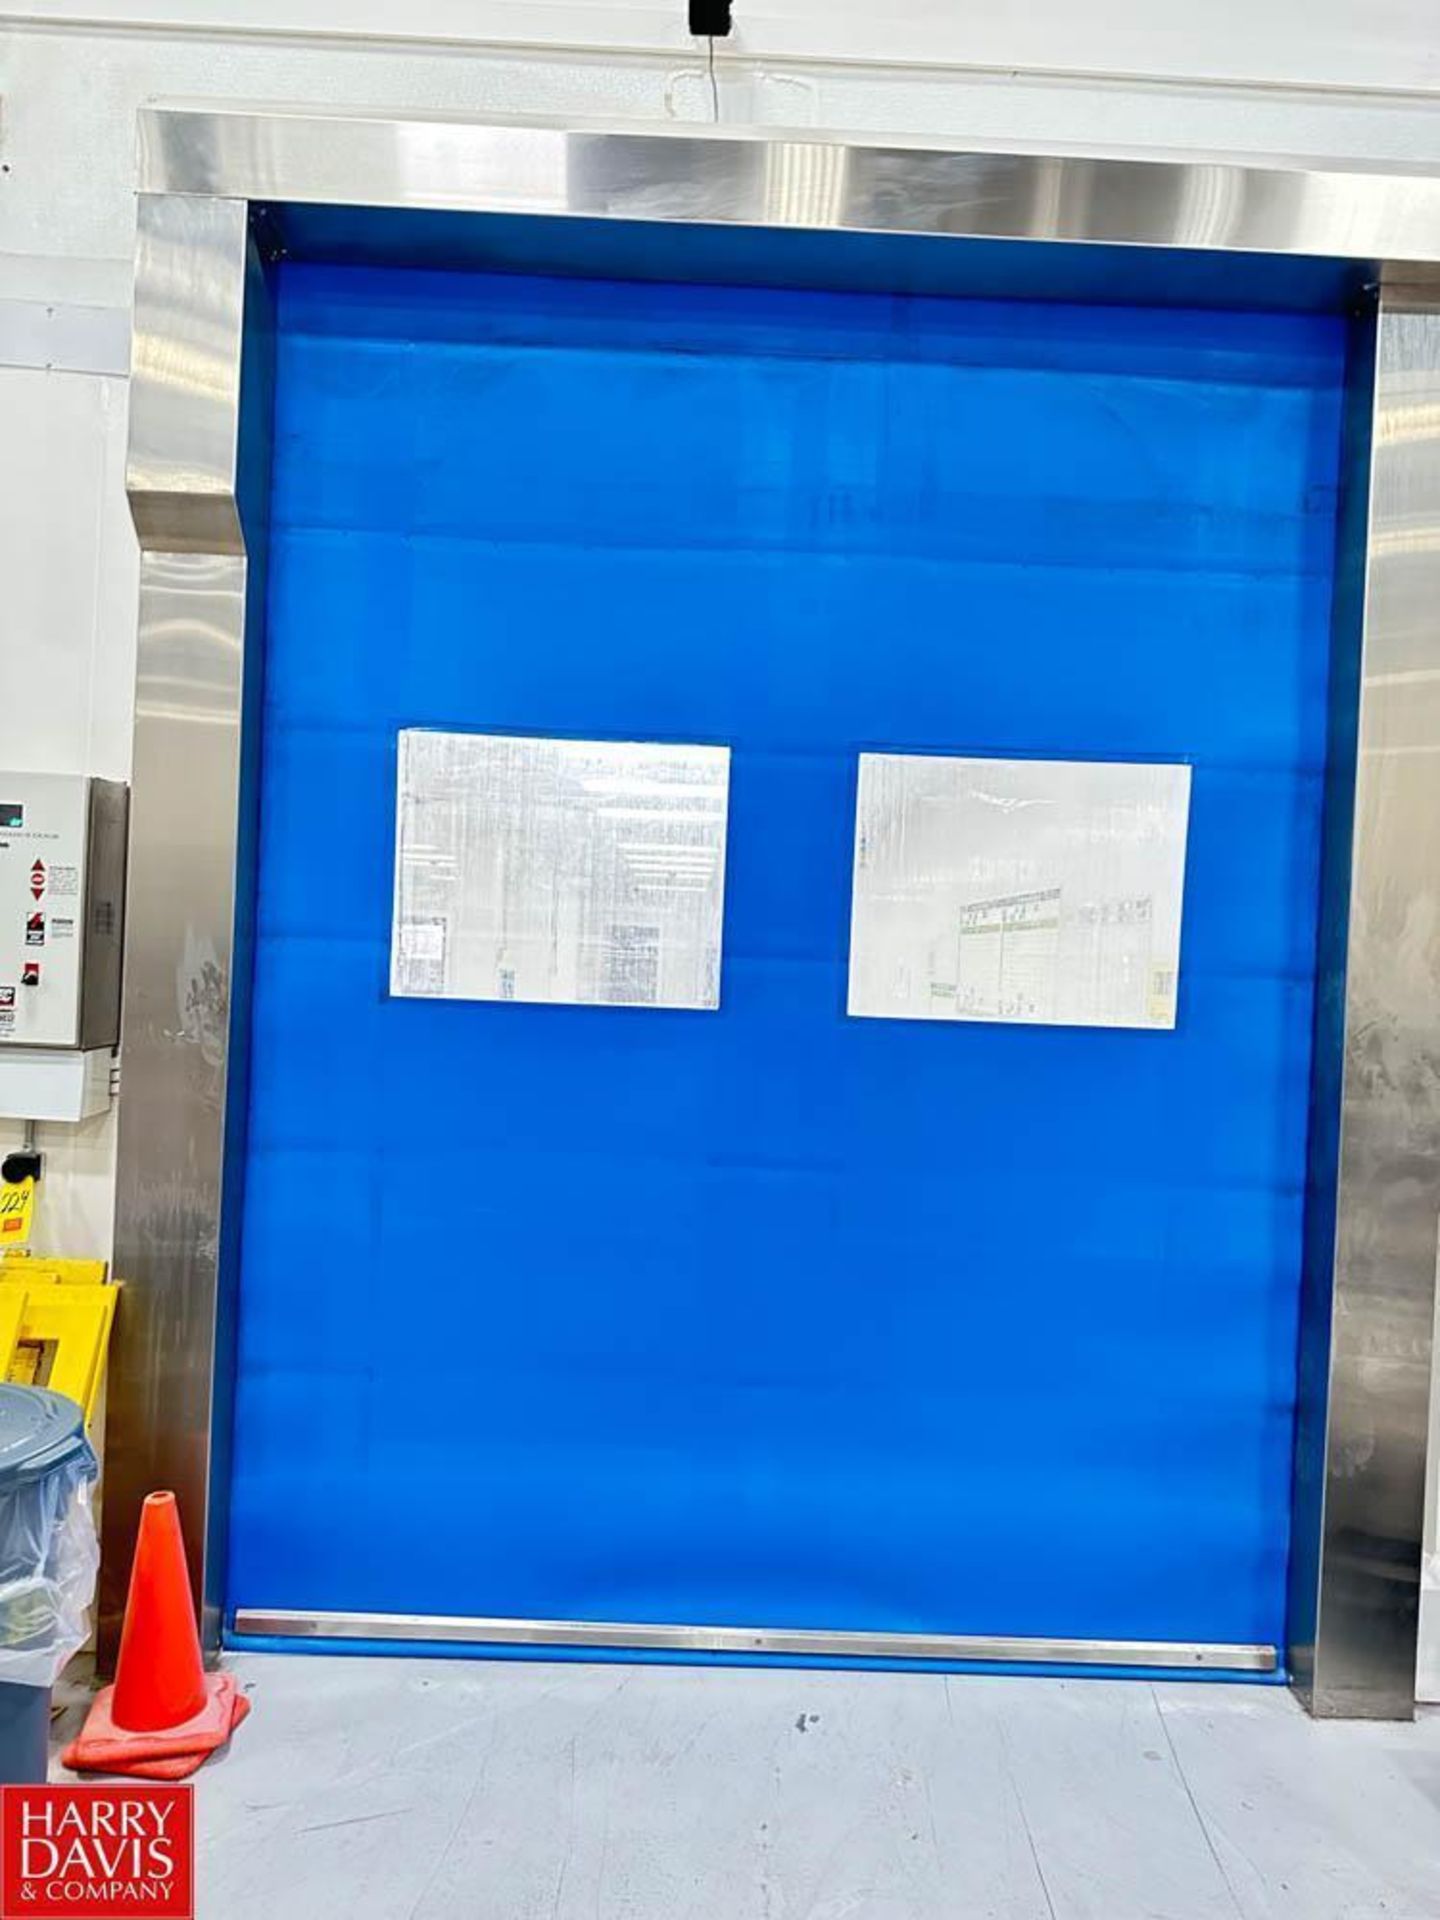 Rytec High Speed Roll-Up Door, Dimensions = 96" Width x 110" Height - Rigging Fee: $1250